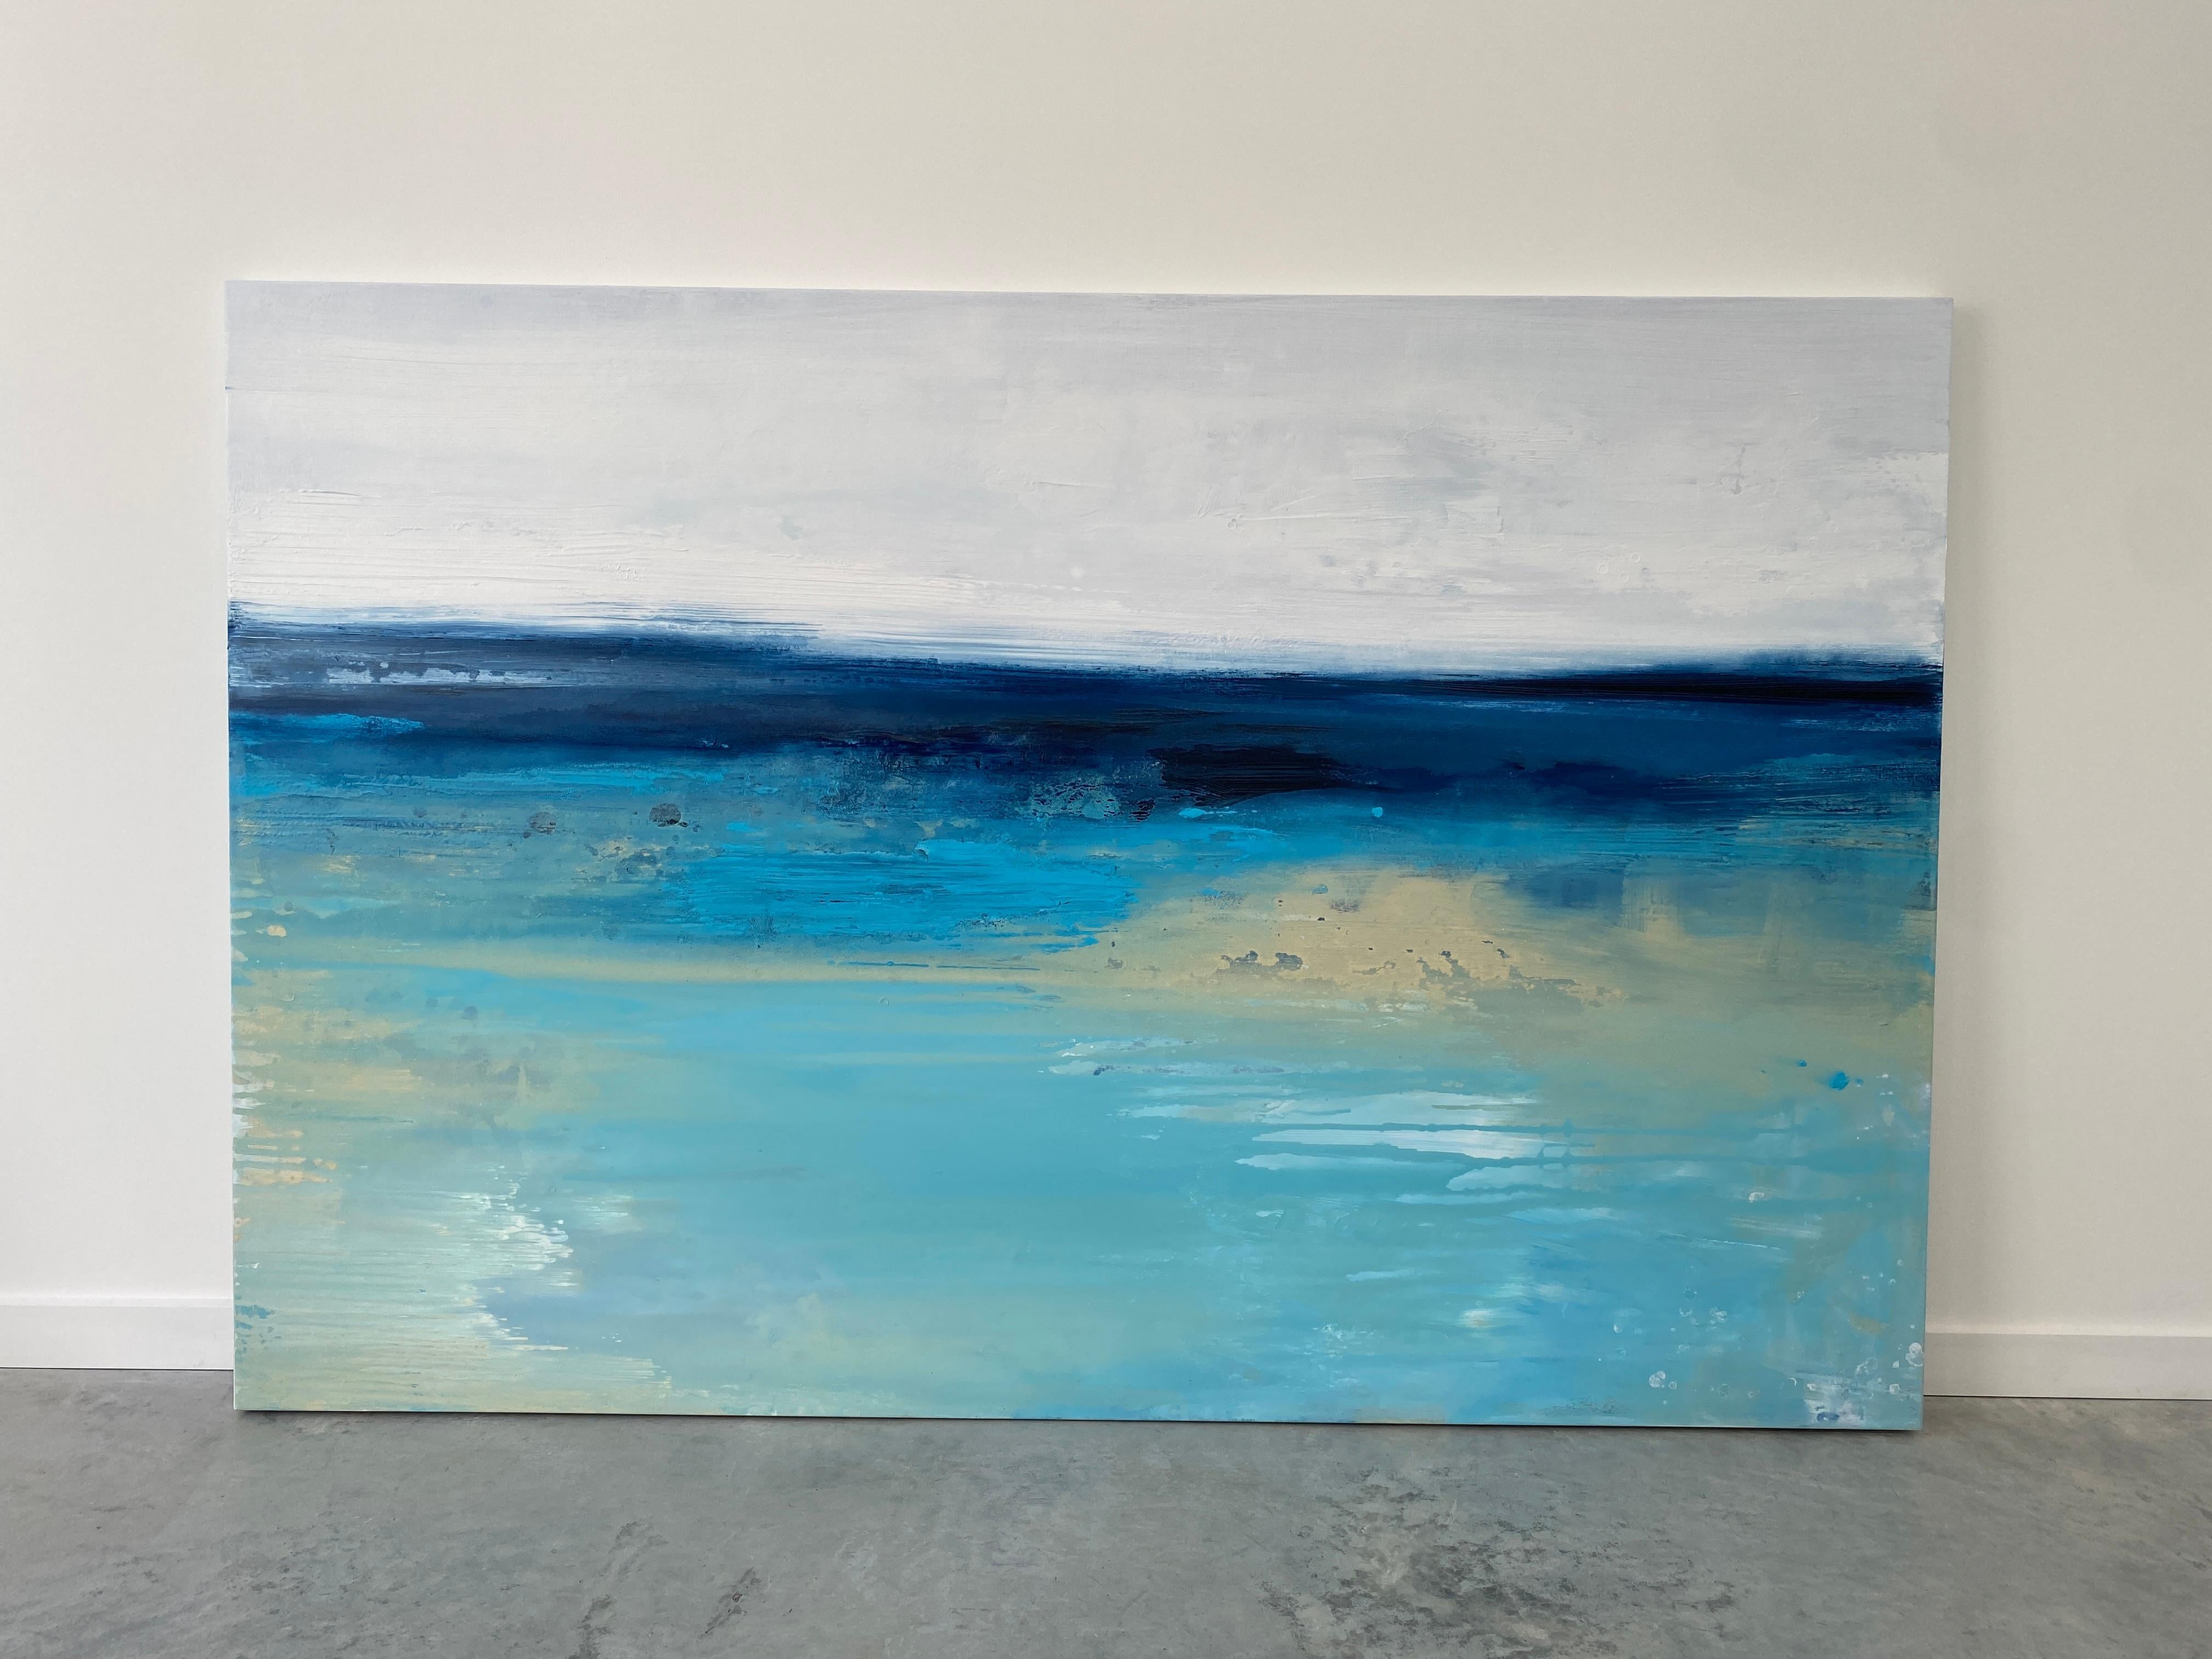 Painted for 'Art Everyday' Exhibition at Suki & Hugh Gallery Australia. A large scale abstract collection painted in minimal colour with pairing down, simplifying, beauty and calm in mind.

Titled 'Tranquility' it is acrylic on canvas, 100cm high x